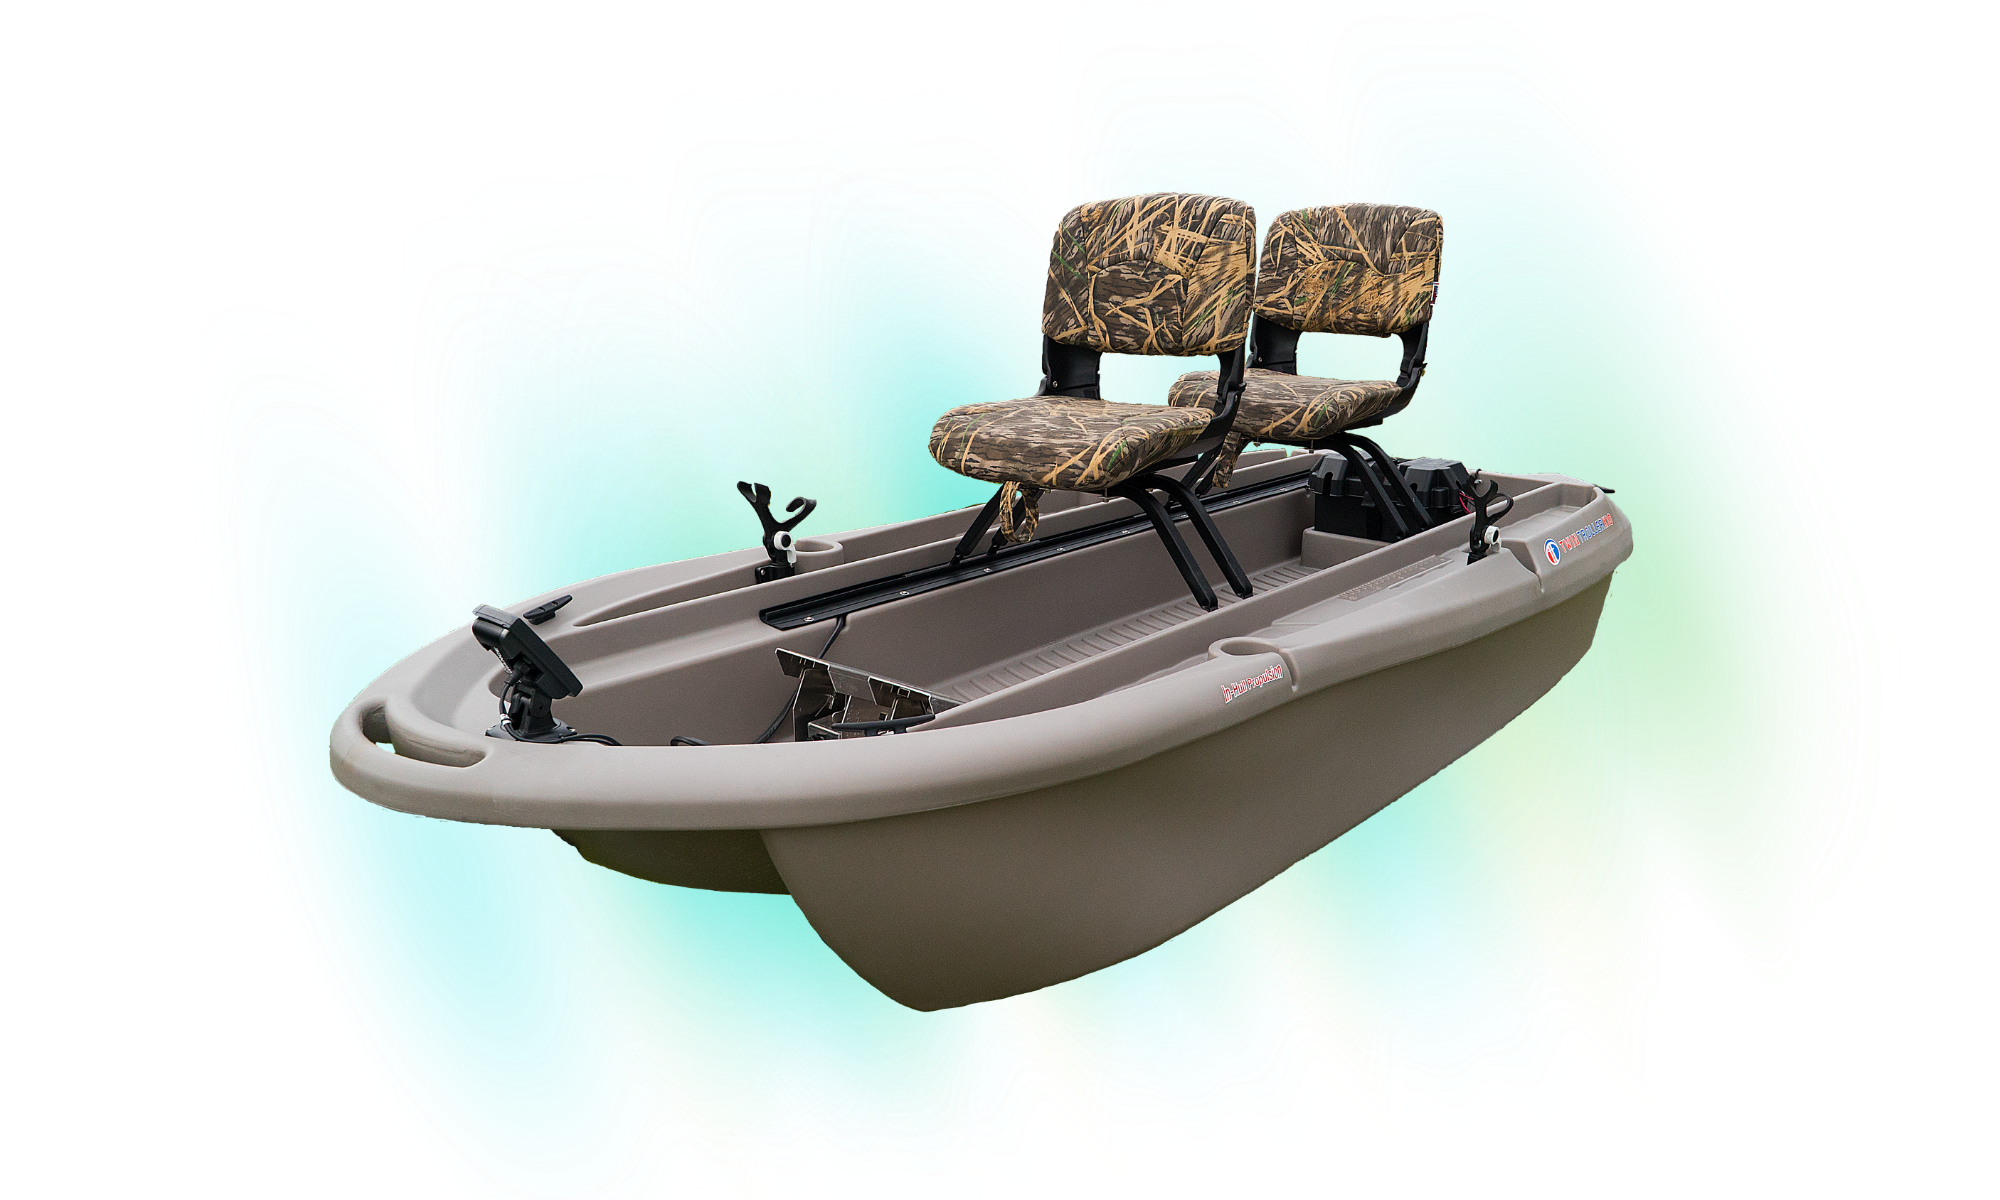 Shop The Best New Bass Fishing Trolling Motor & More